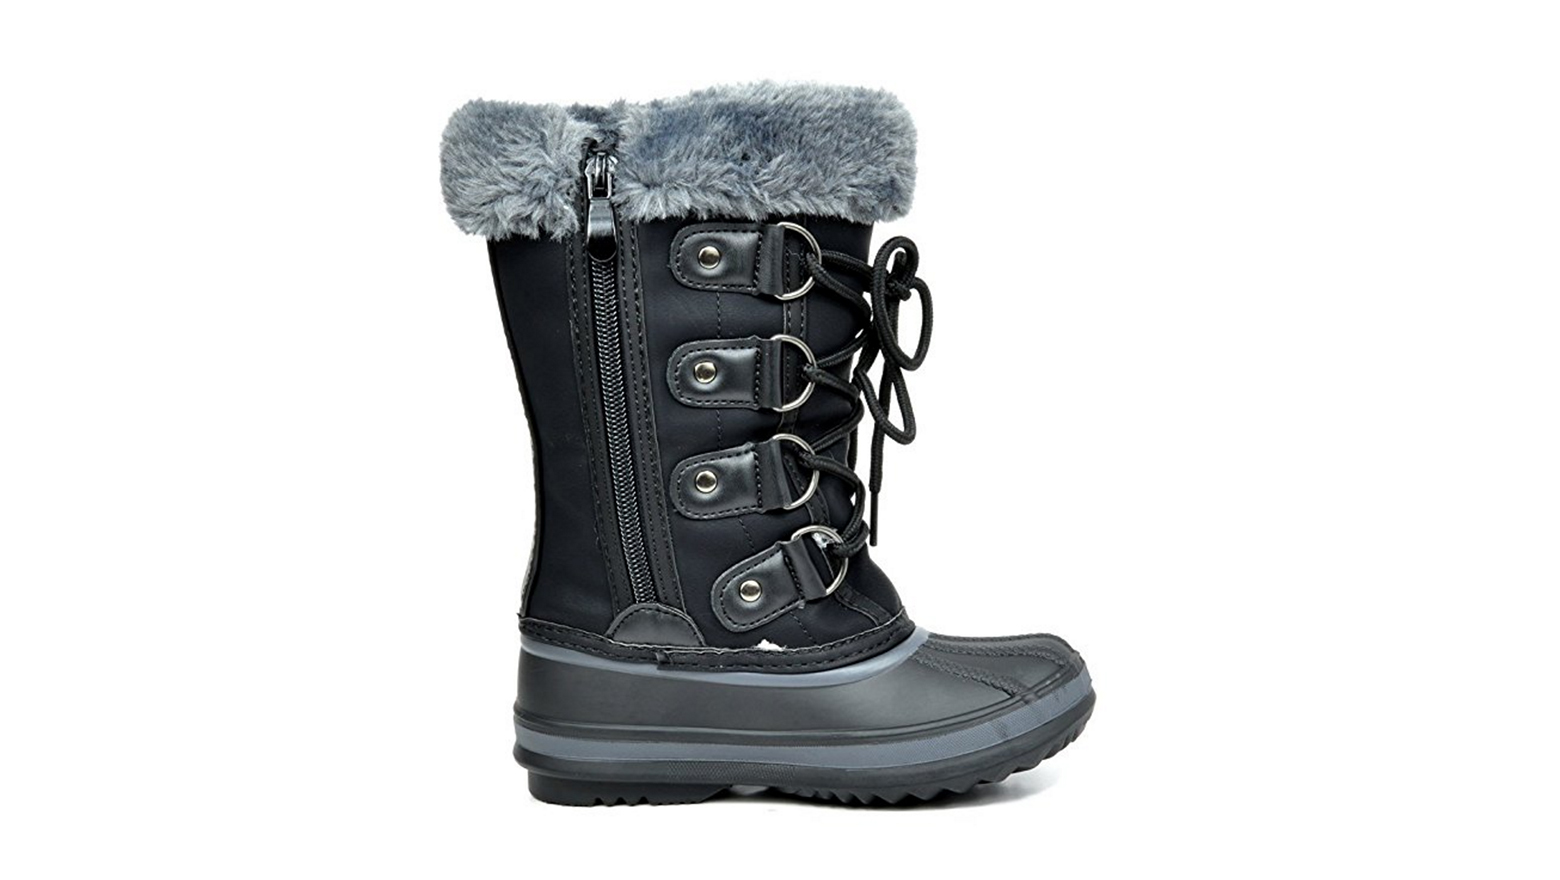 cyber monday deals on winter boots